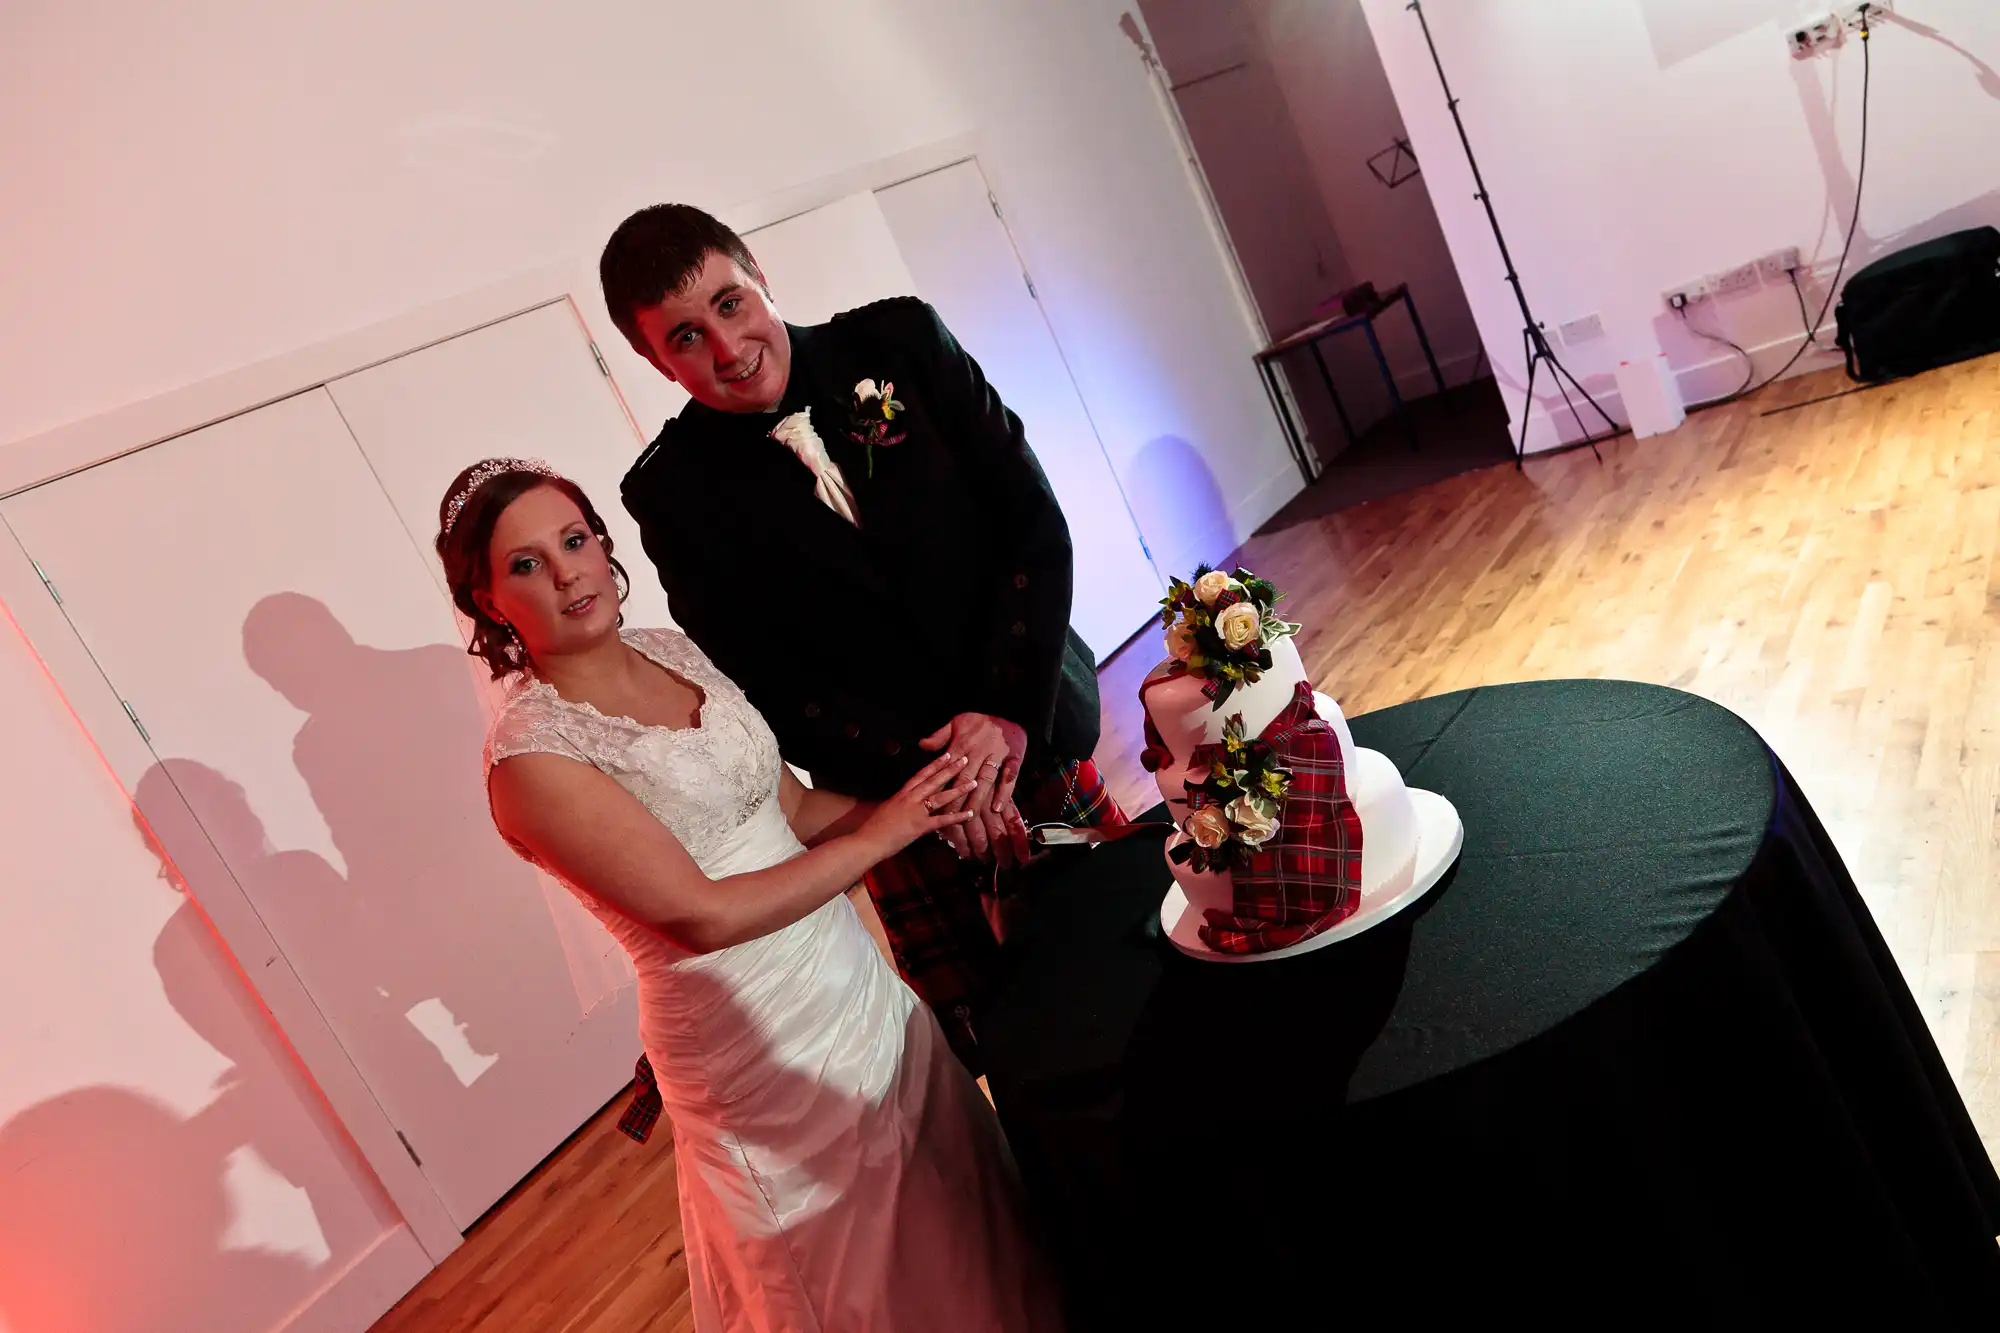 A bride and groom cutting a wedding cake in a banquet hall, both smiling at the camera.